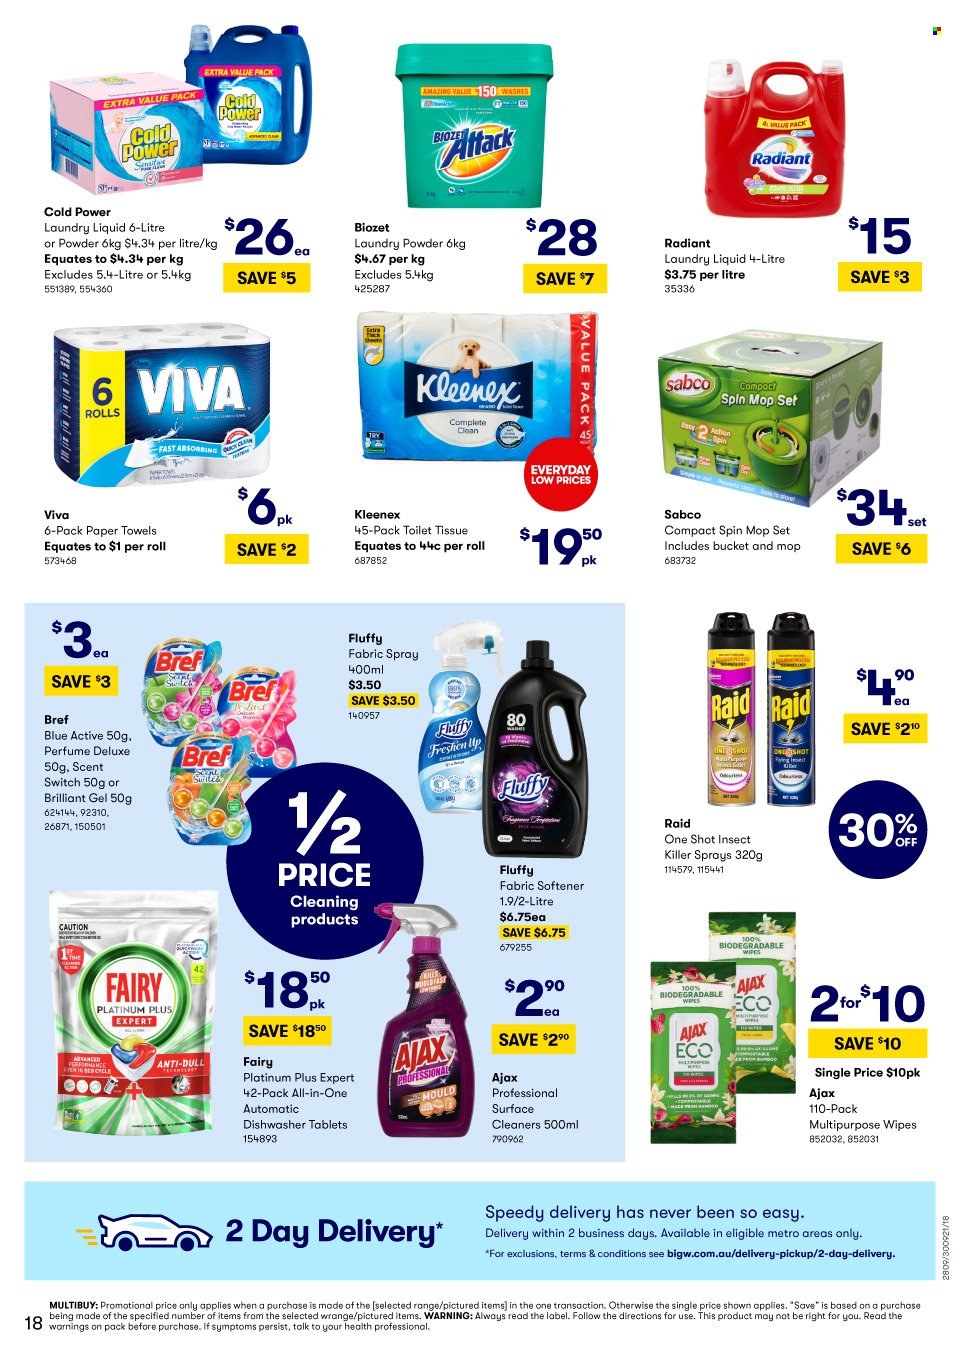 thumbnail - BIG W Catalogue - Sales products - switch, wipes, Kleenex, toilet paper, multipurpose wipes, kitchen towels, paper towels, Ajax Eco, Fairy, Ajax, Sabco, fabric softener, laundry powder, laundry detergent, dishwasher cleaner, dishwasher tablets, eau de parfum, insect killer, Raid, spin mop, mop. Page 19.